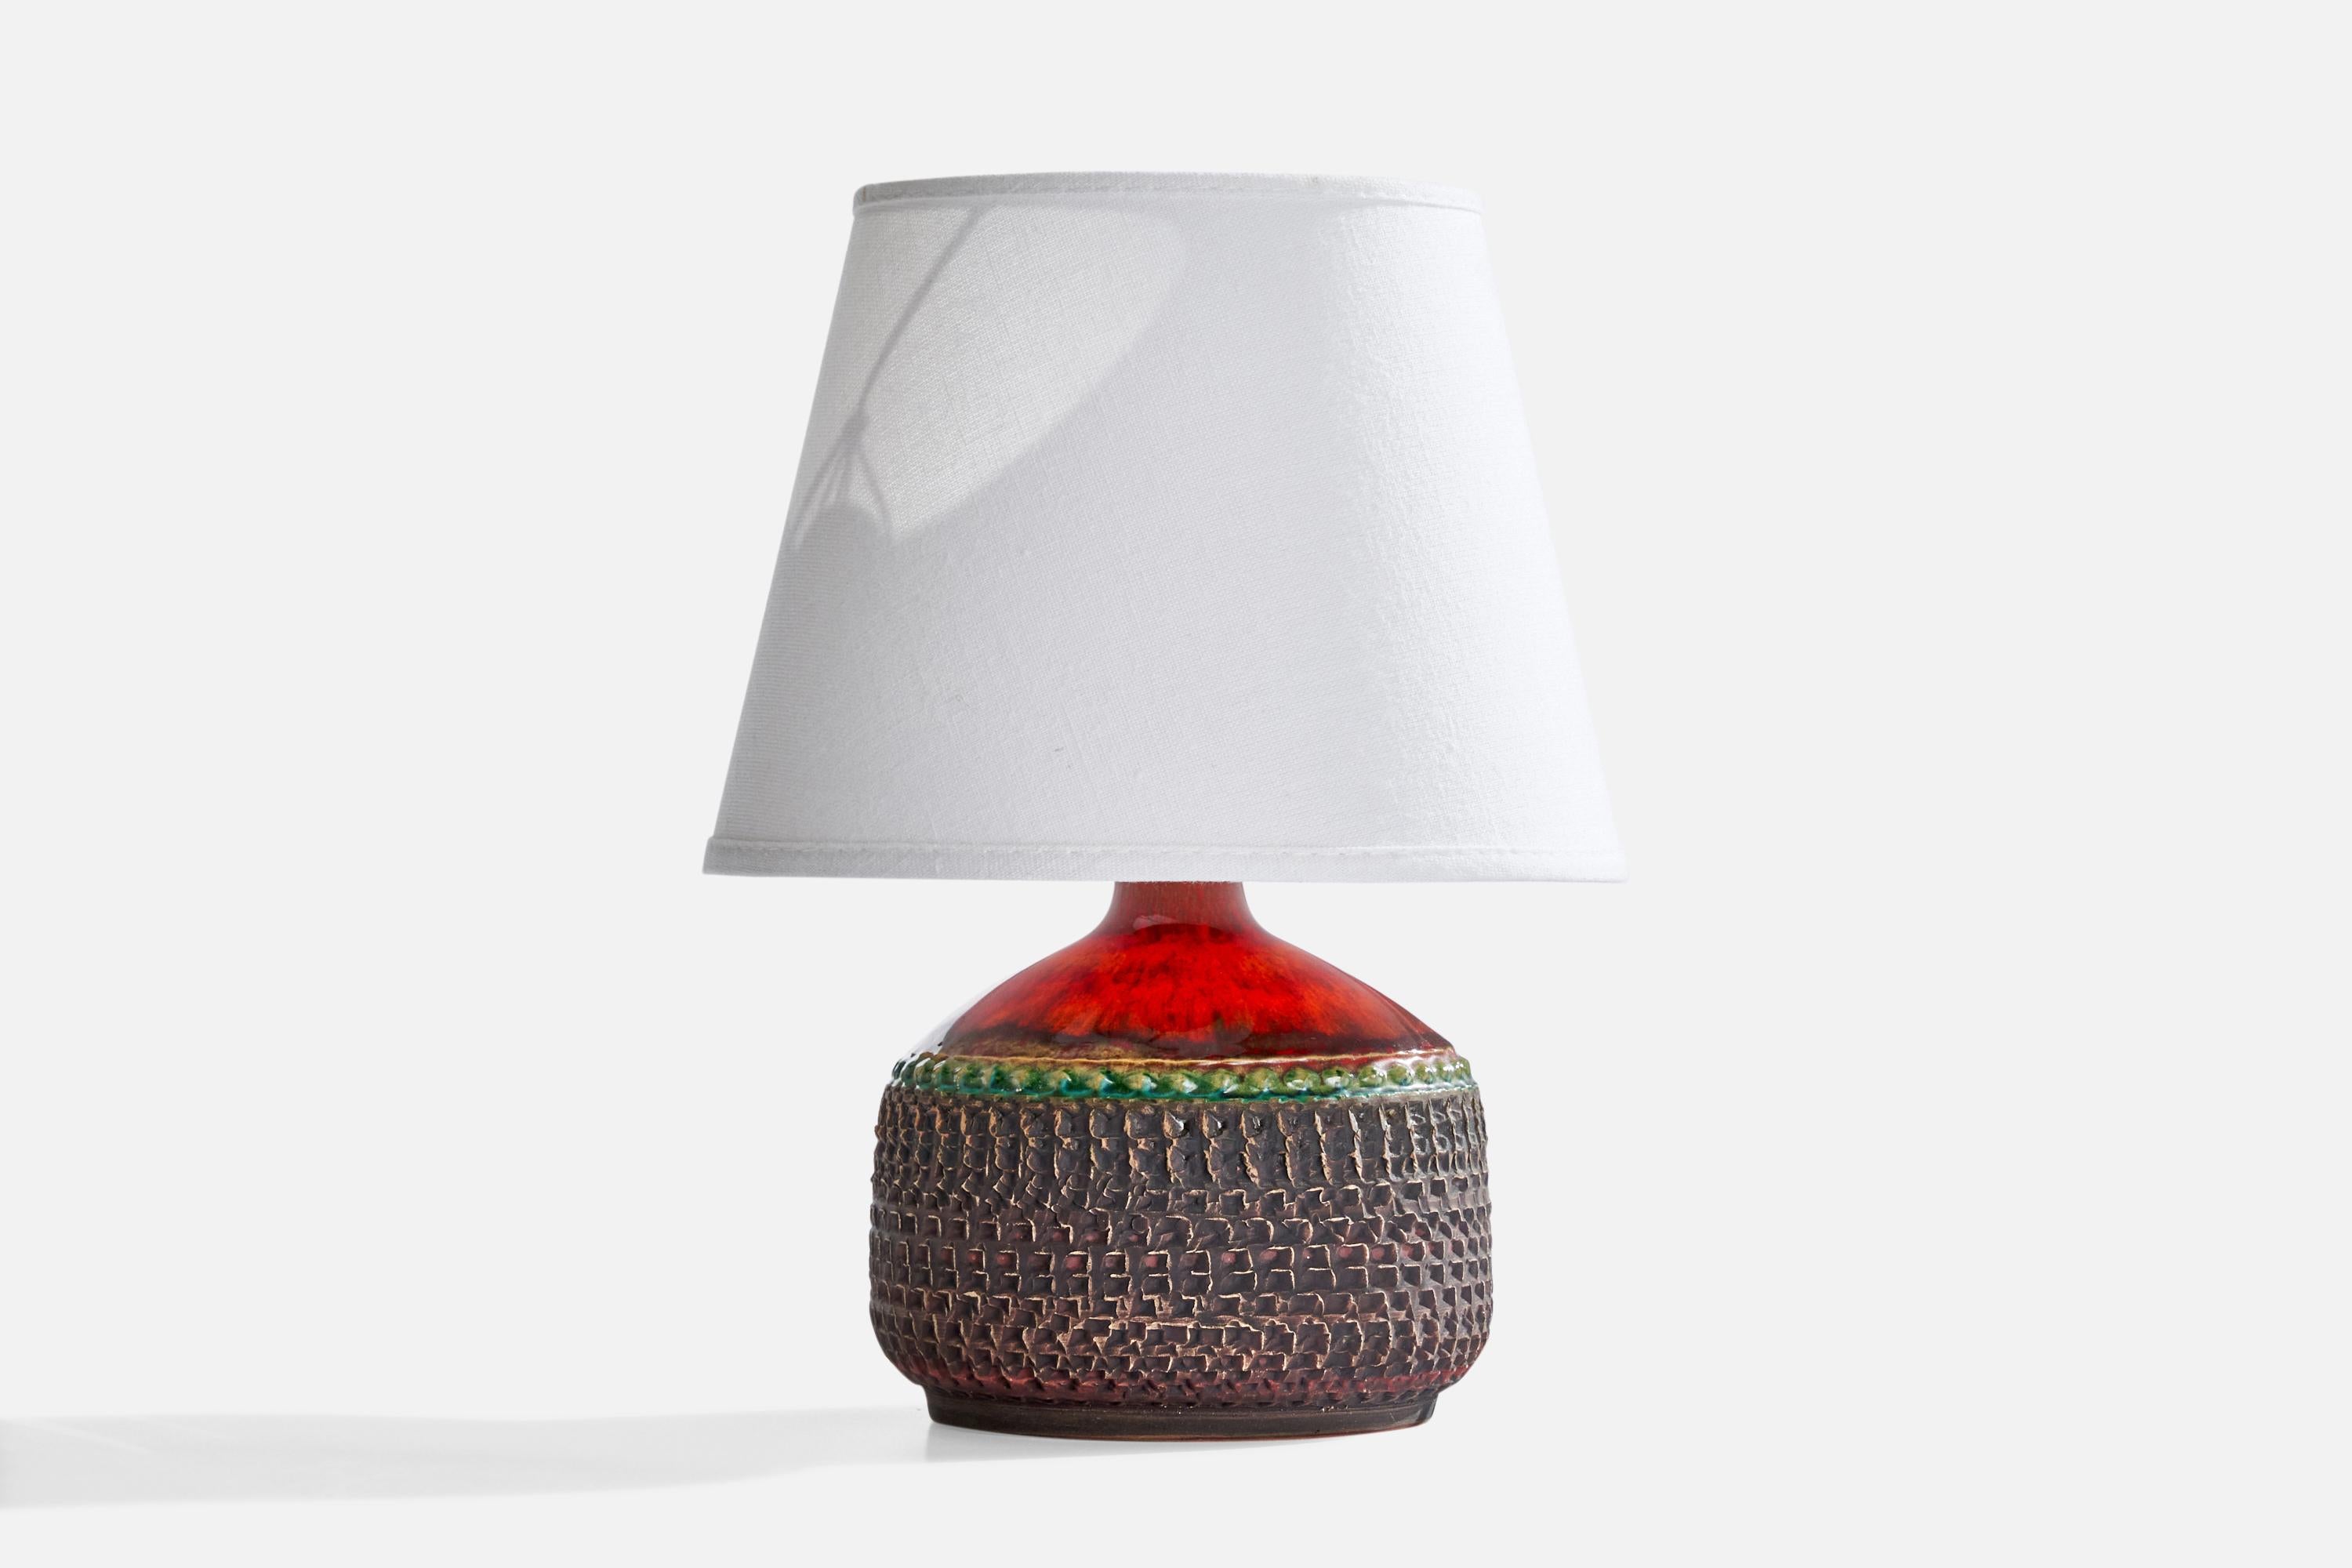 A red and green-glazed stoneware table lamp produced by Klase Höganäs, Sweden, c. 1970s.

Dimensions of Lamp (inches): 7.25”  H x 5.25” Diameter
Dimensions of Shade (inches): 5.25” Top Diameter x 8”  Bottom Diameter x 6” H
Dimensions of Lamp with